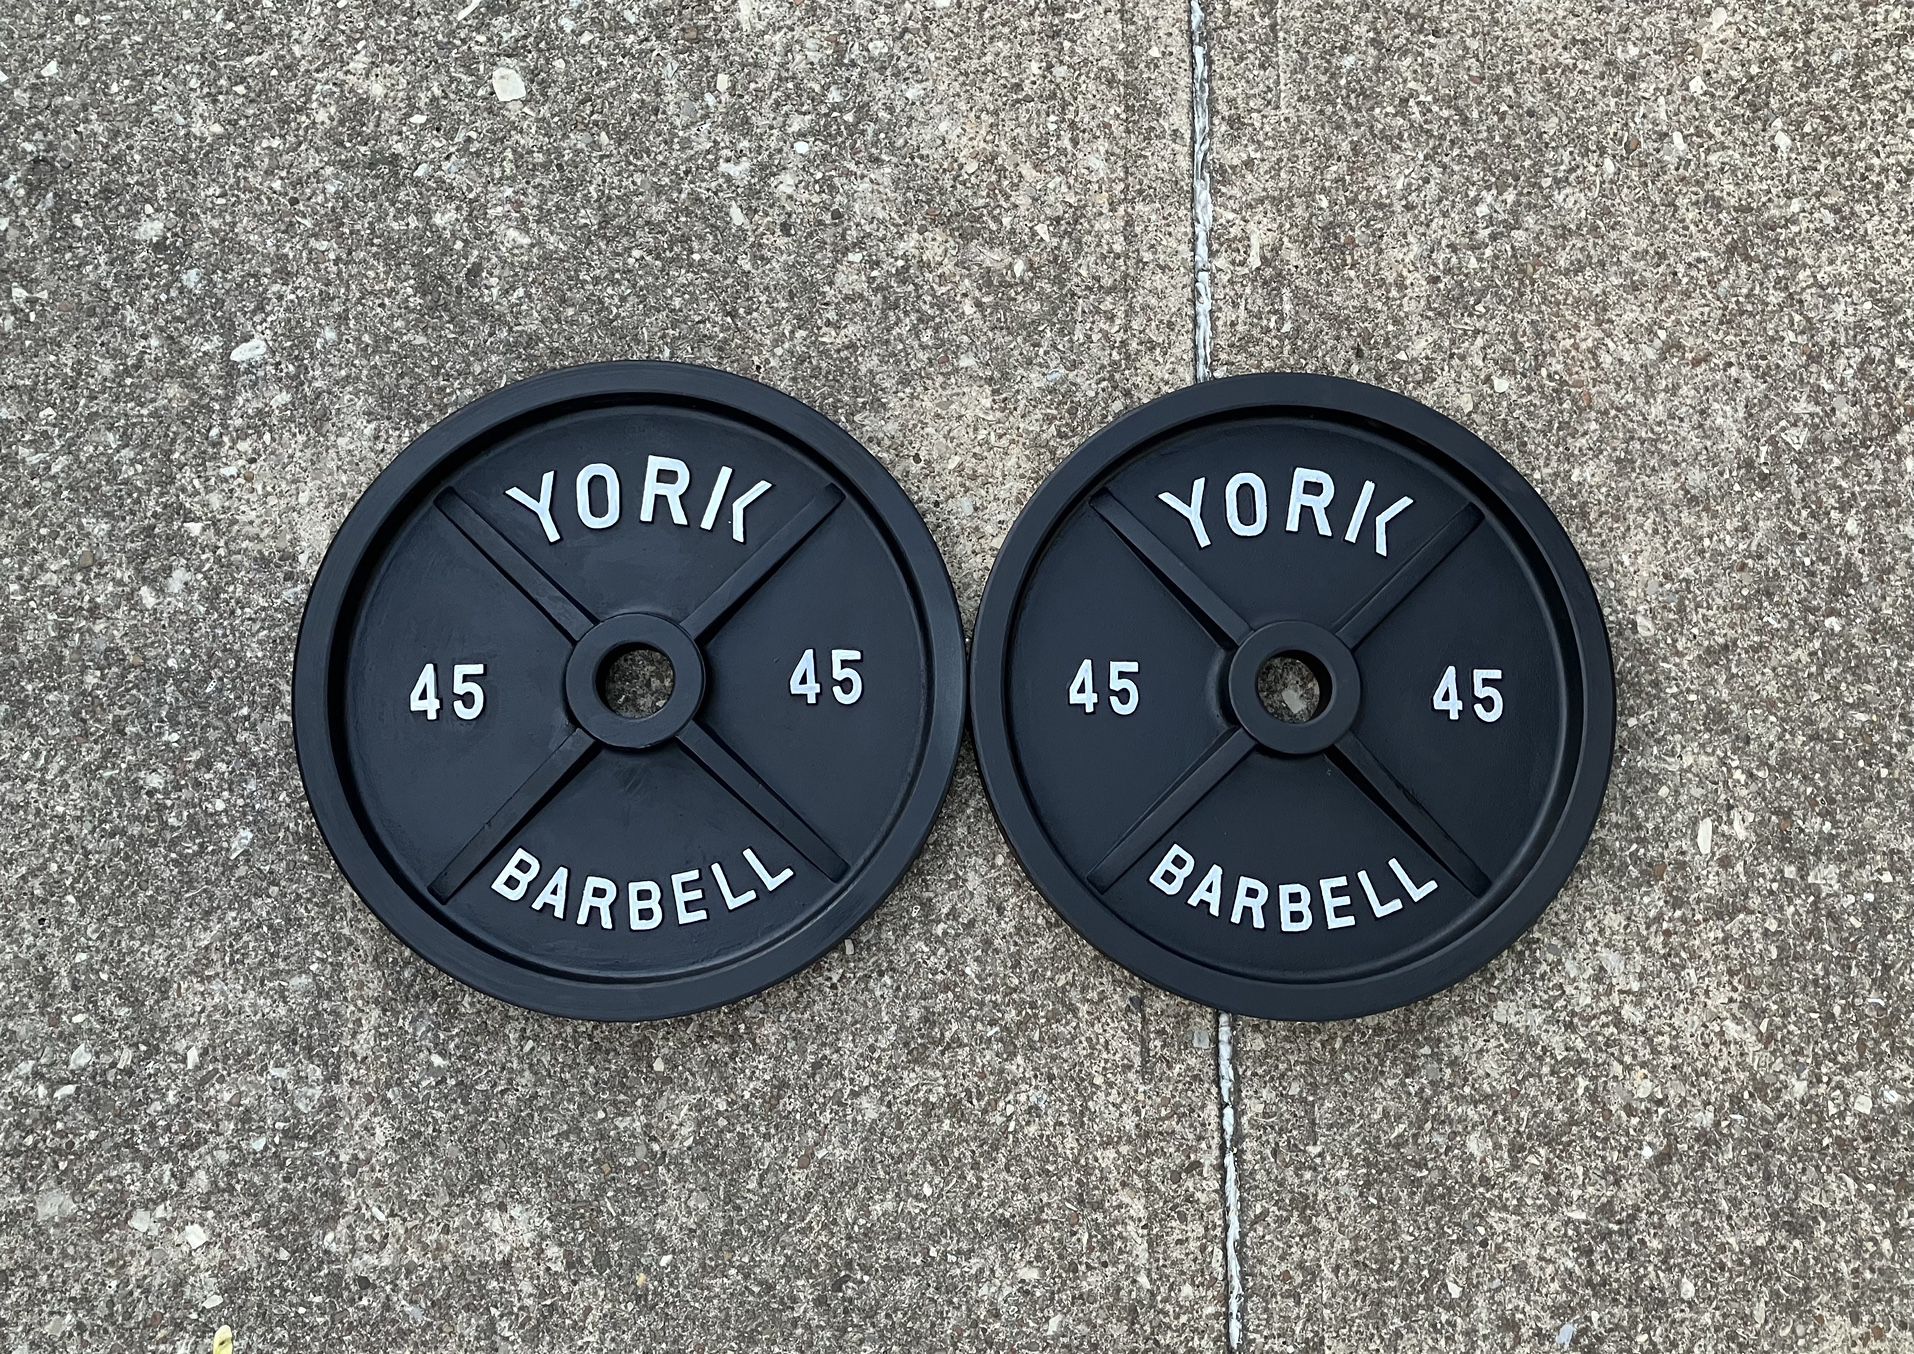 York Vintage 45 Ib Olympic 2" weight plate set plates weights 45lbs 45lb lbs for Barbell bar PA 90lbs total